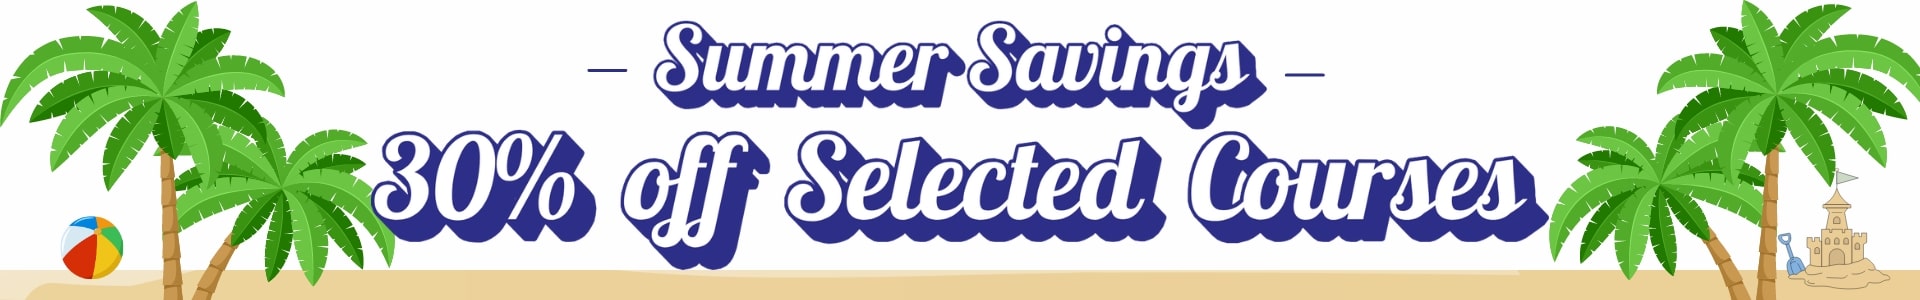 Summer Savings save 30% off selected health and safety courses!